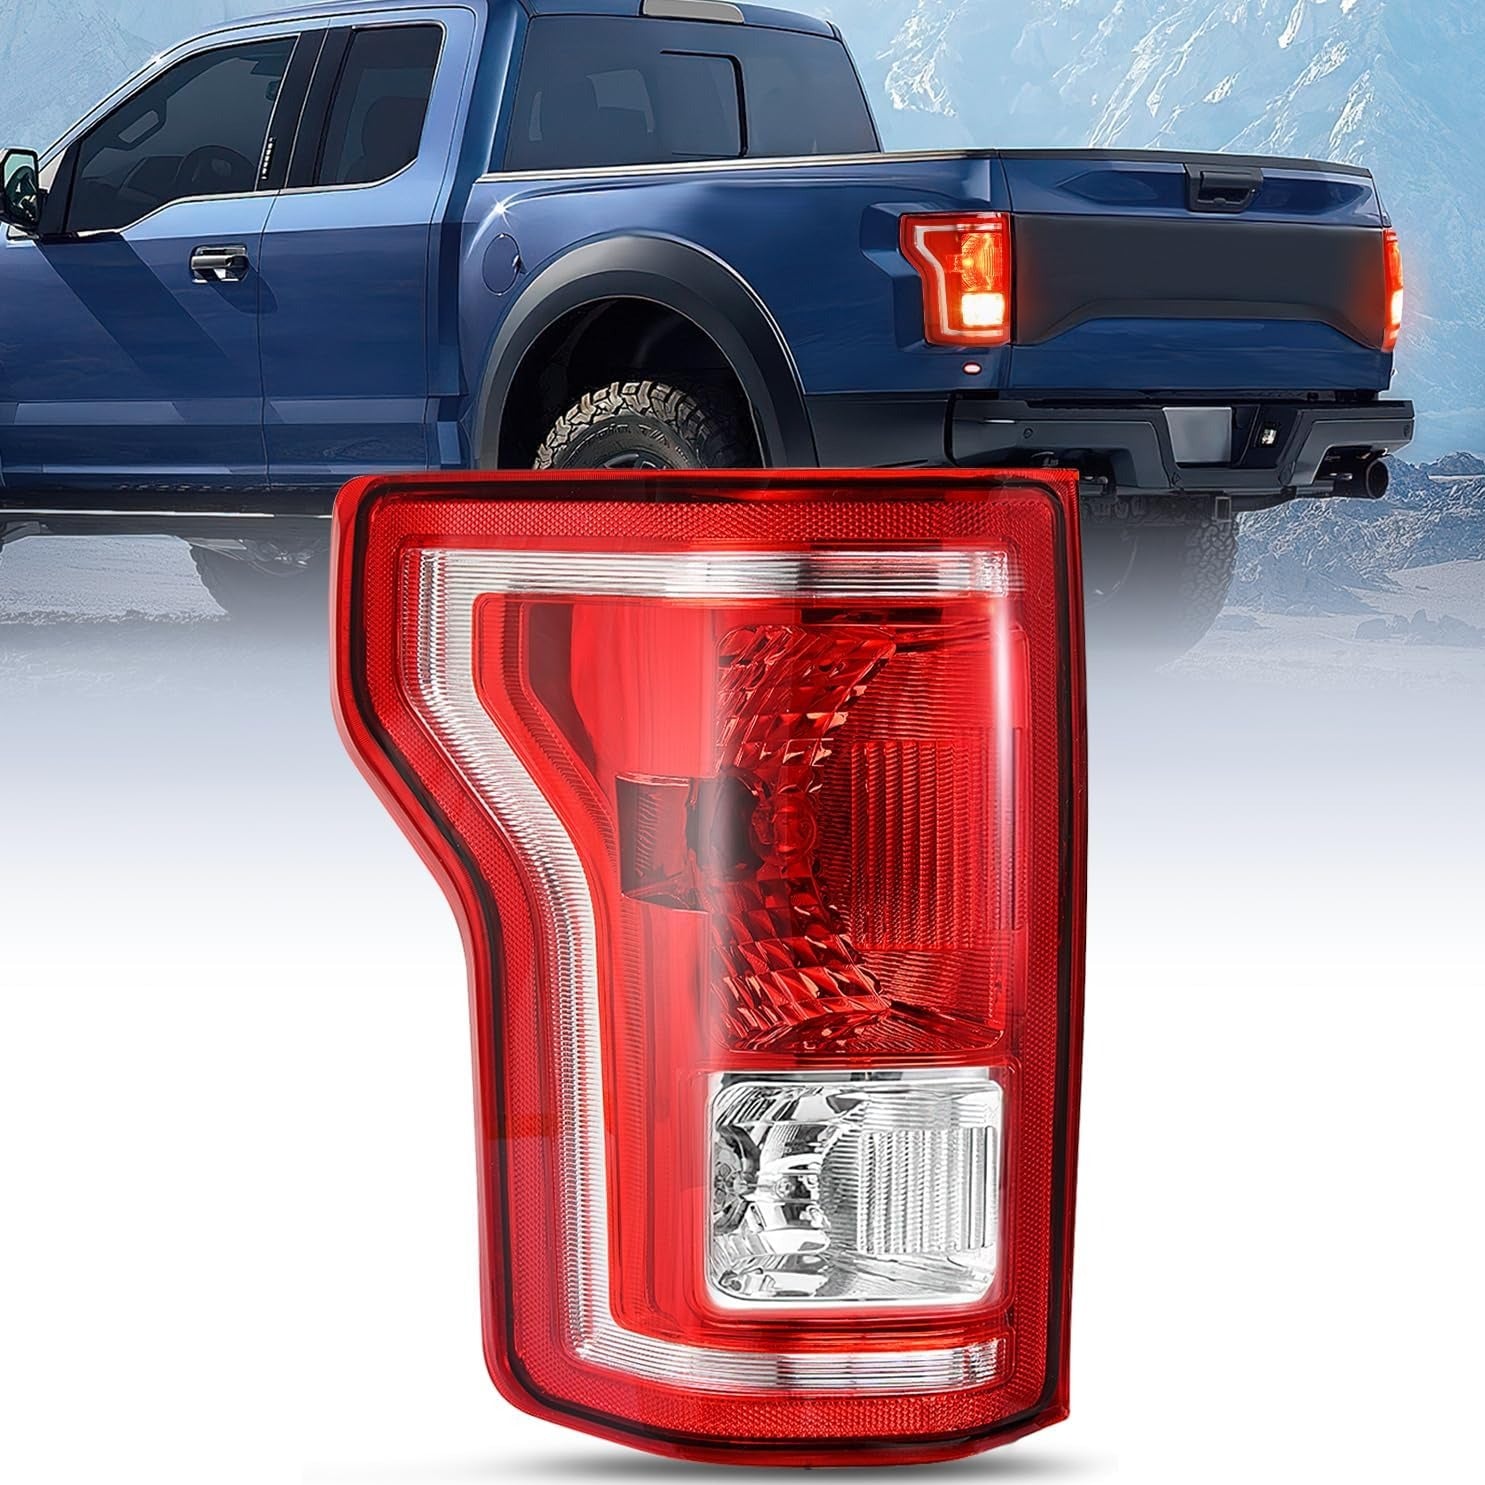 2015-2017 Ford F150 Taillight Assembly Rear Lamp Replacement OE Style Red Housing with Bulbs and Harness Driver Side Nilight